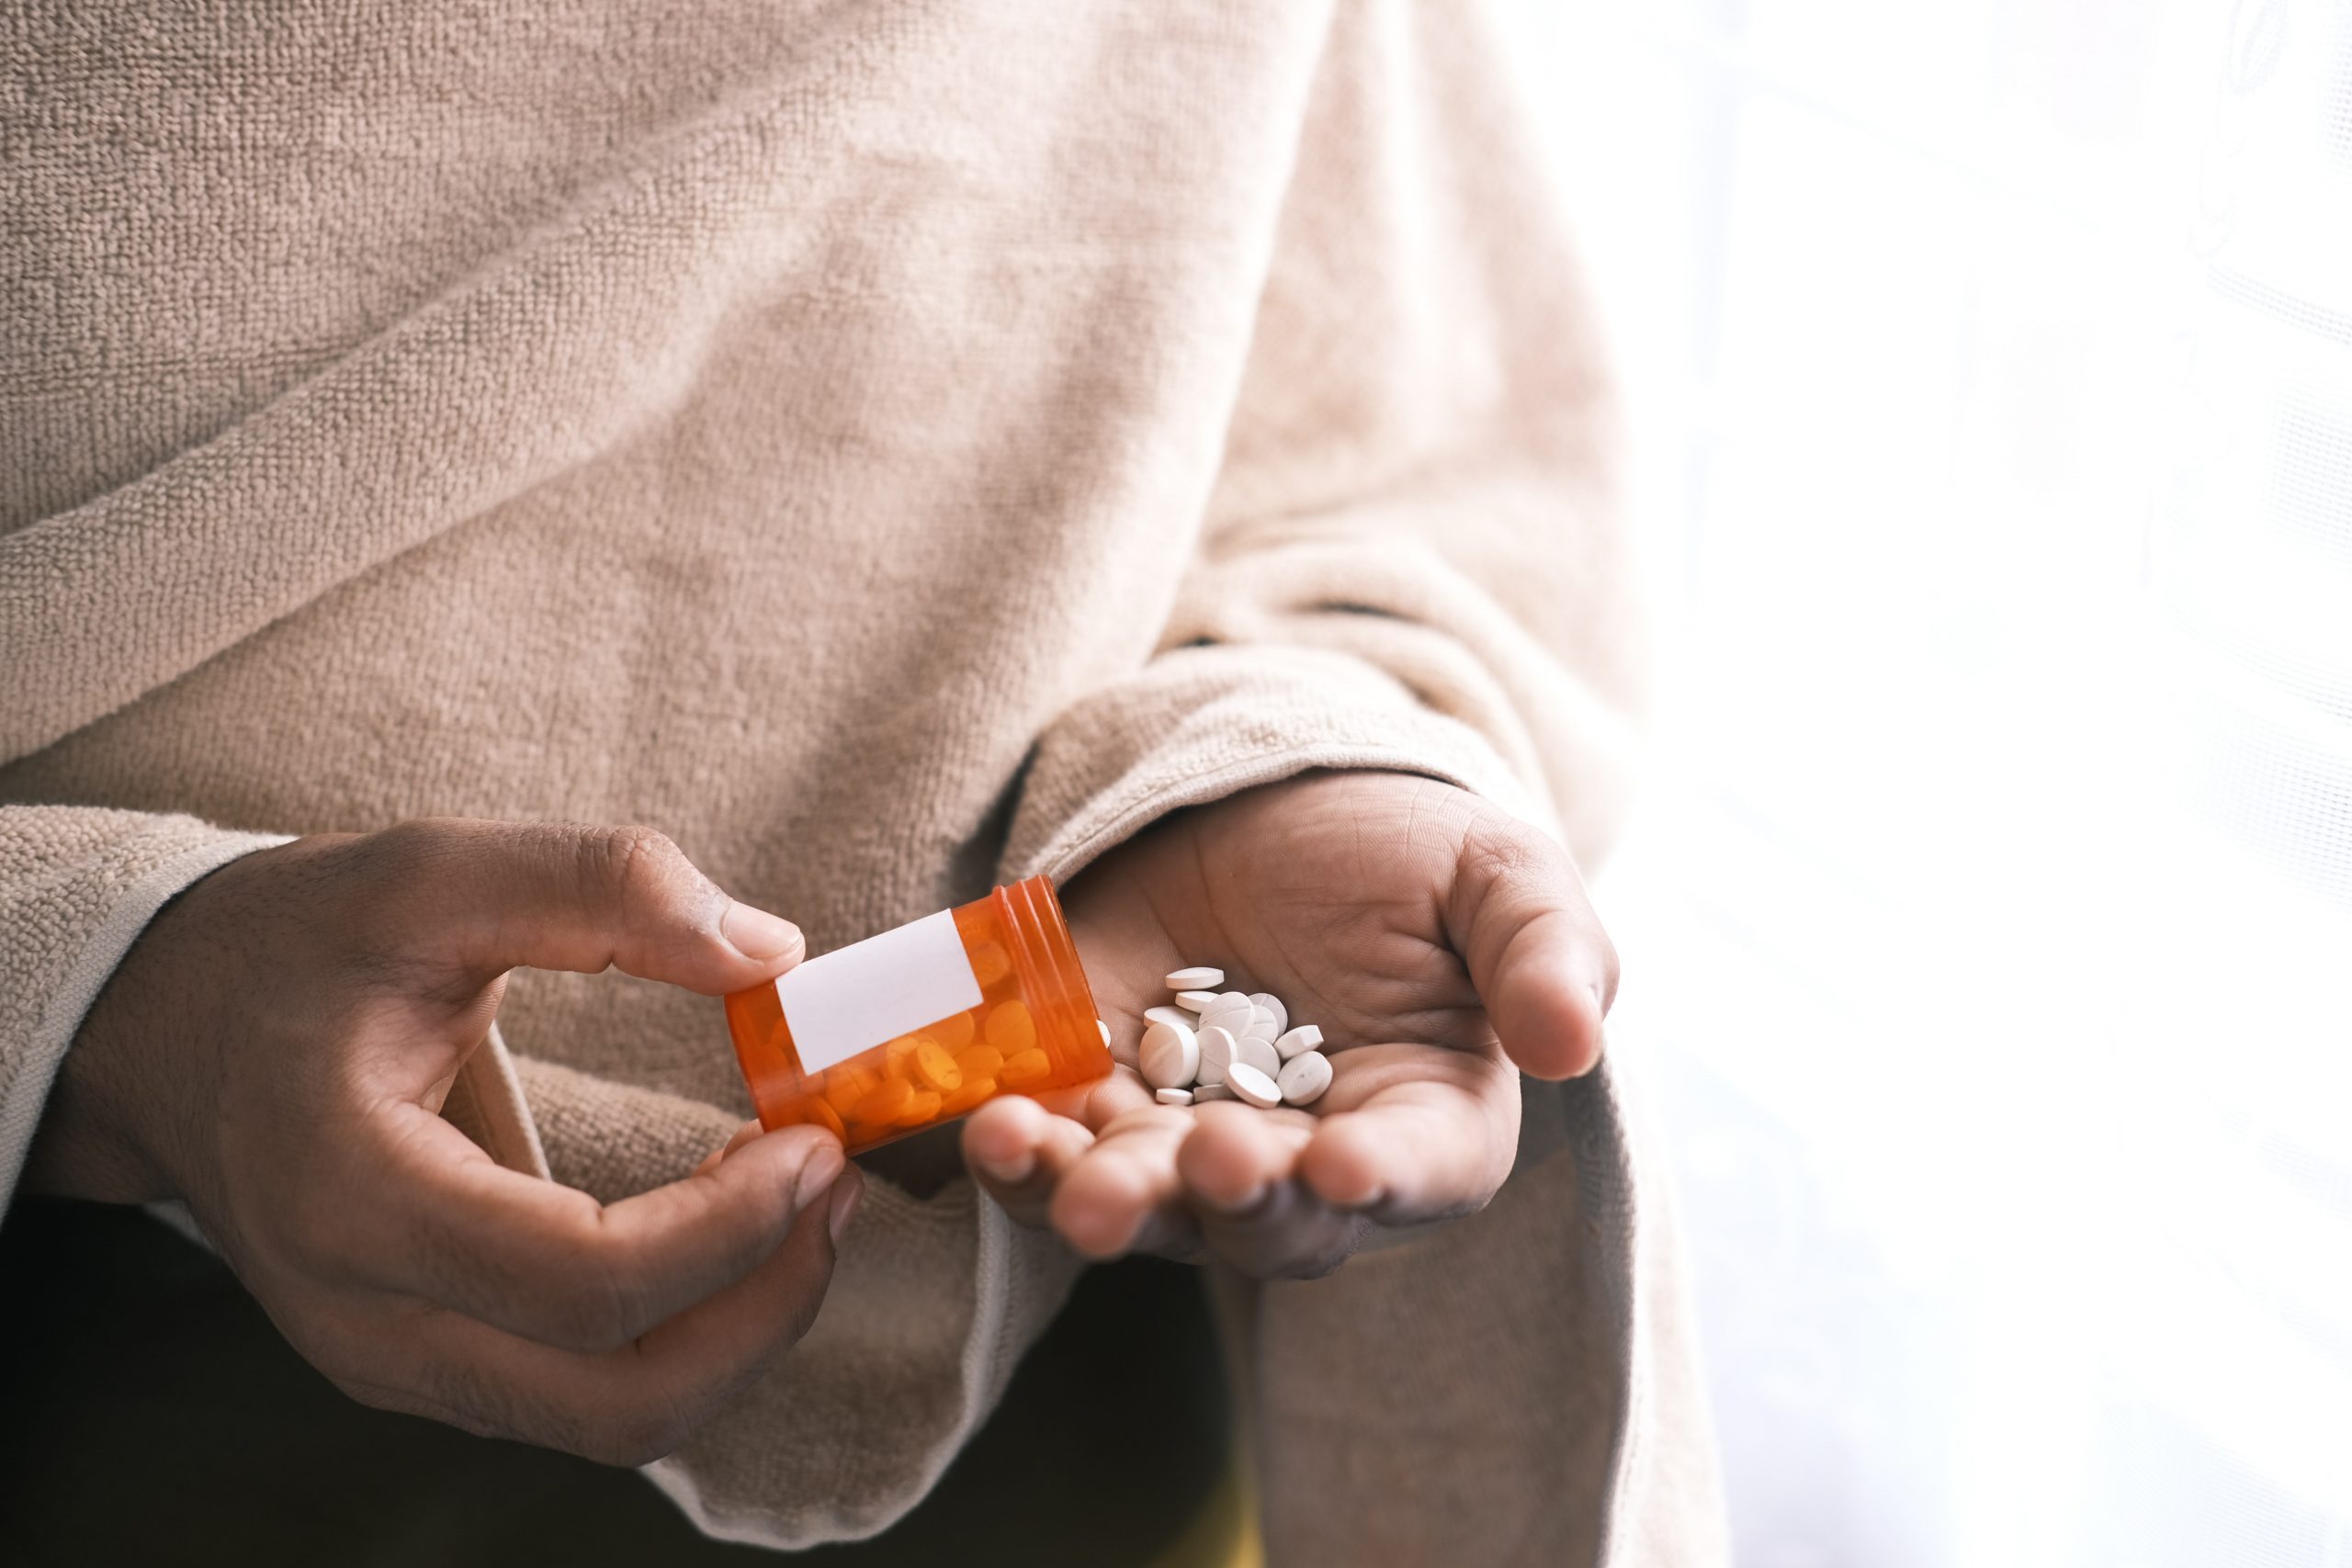 Picture of a person pouring white pills from a prescription bottle into their hand